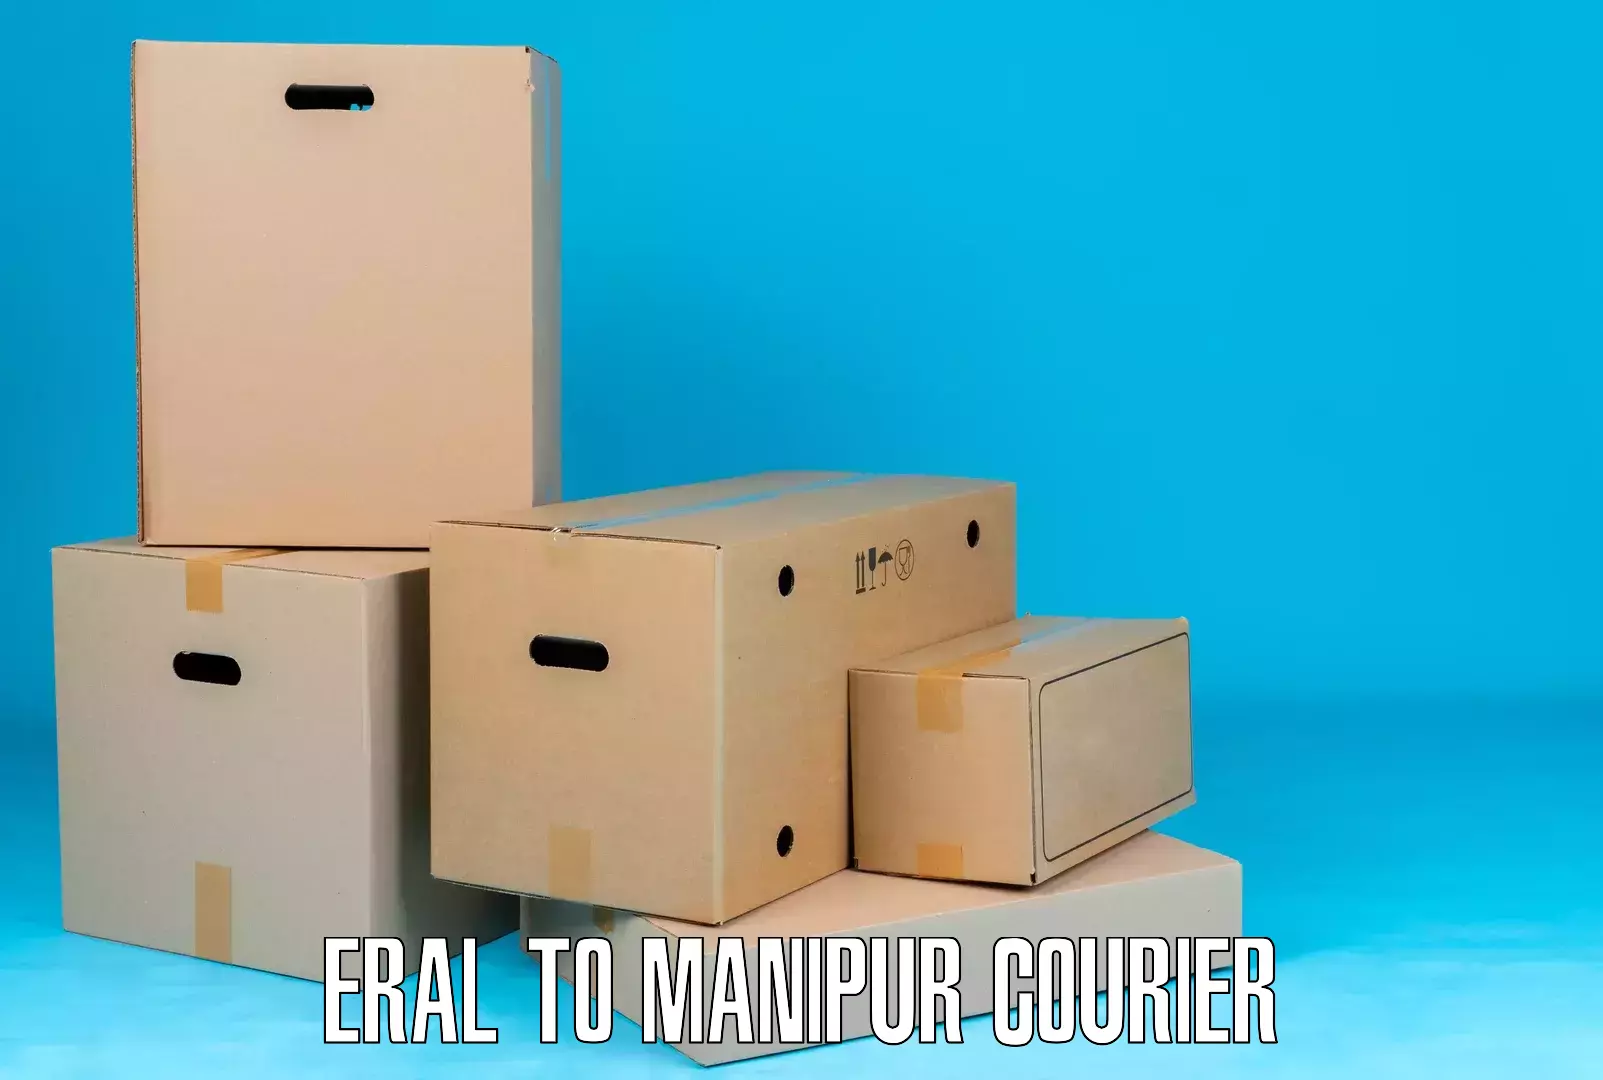 Efficient package consolidation Eral to Manipur